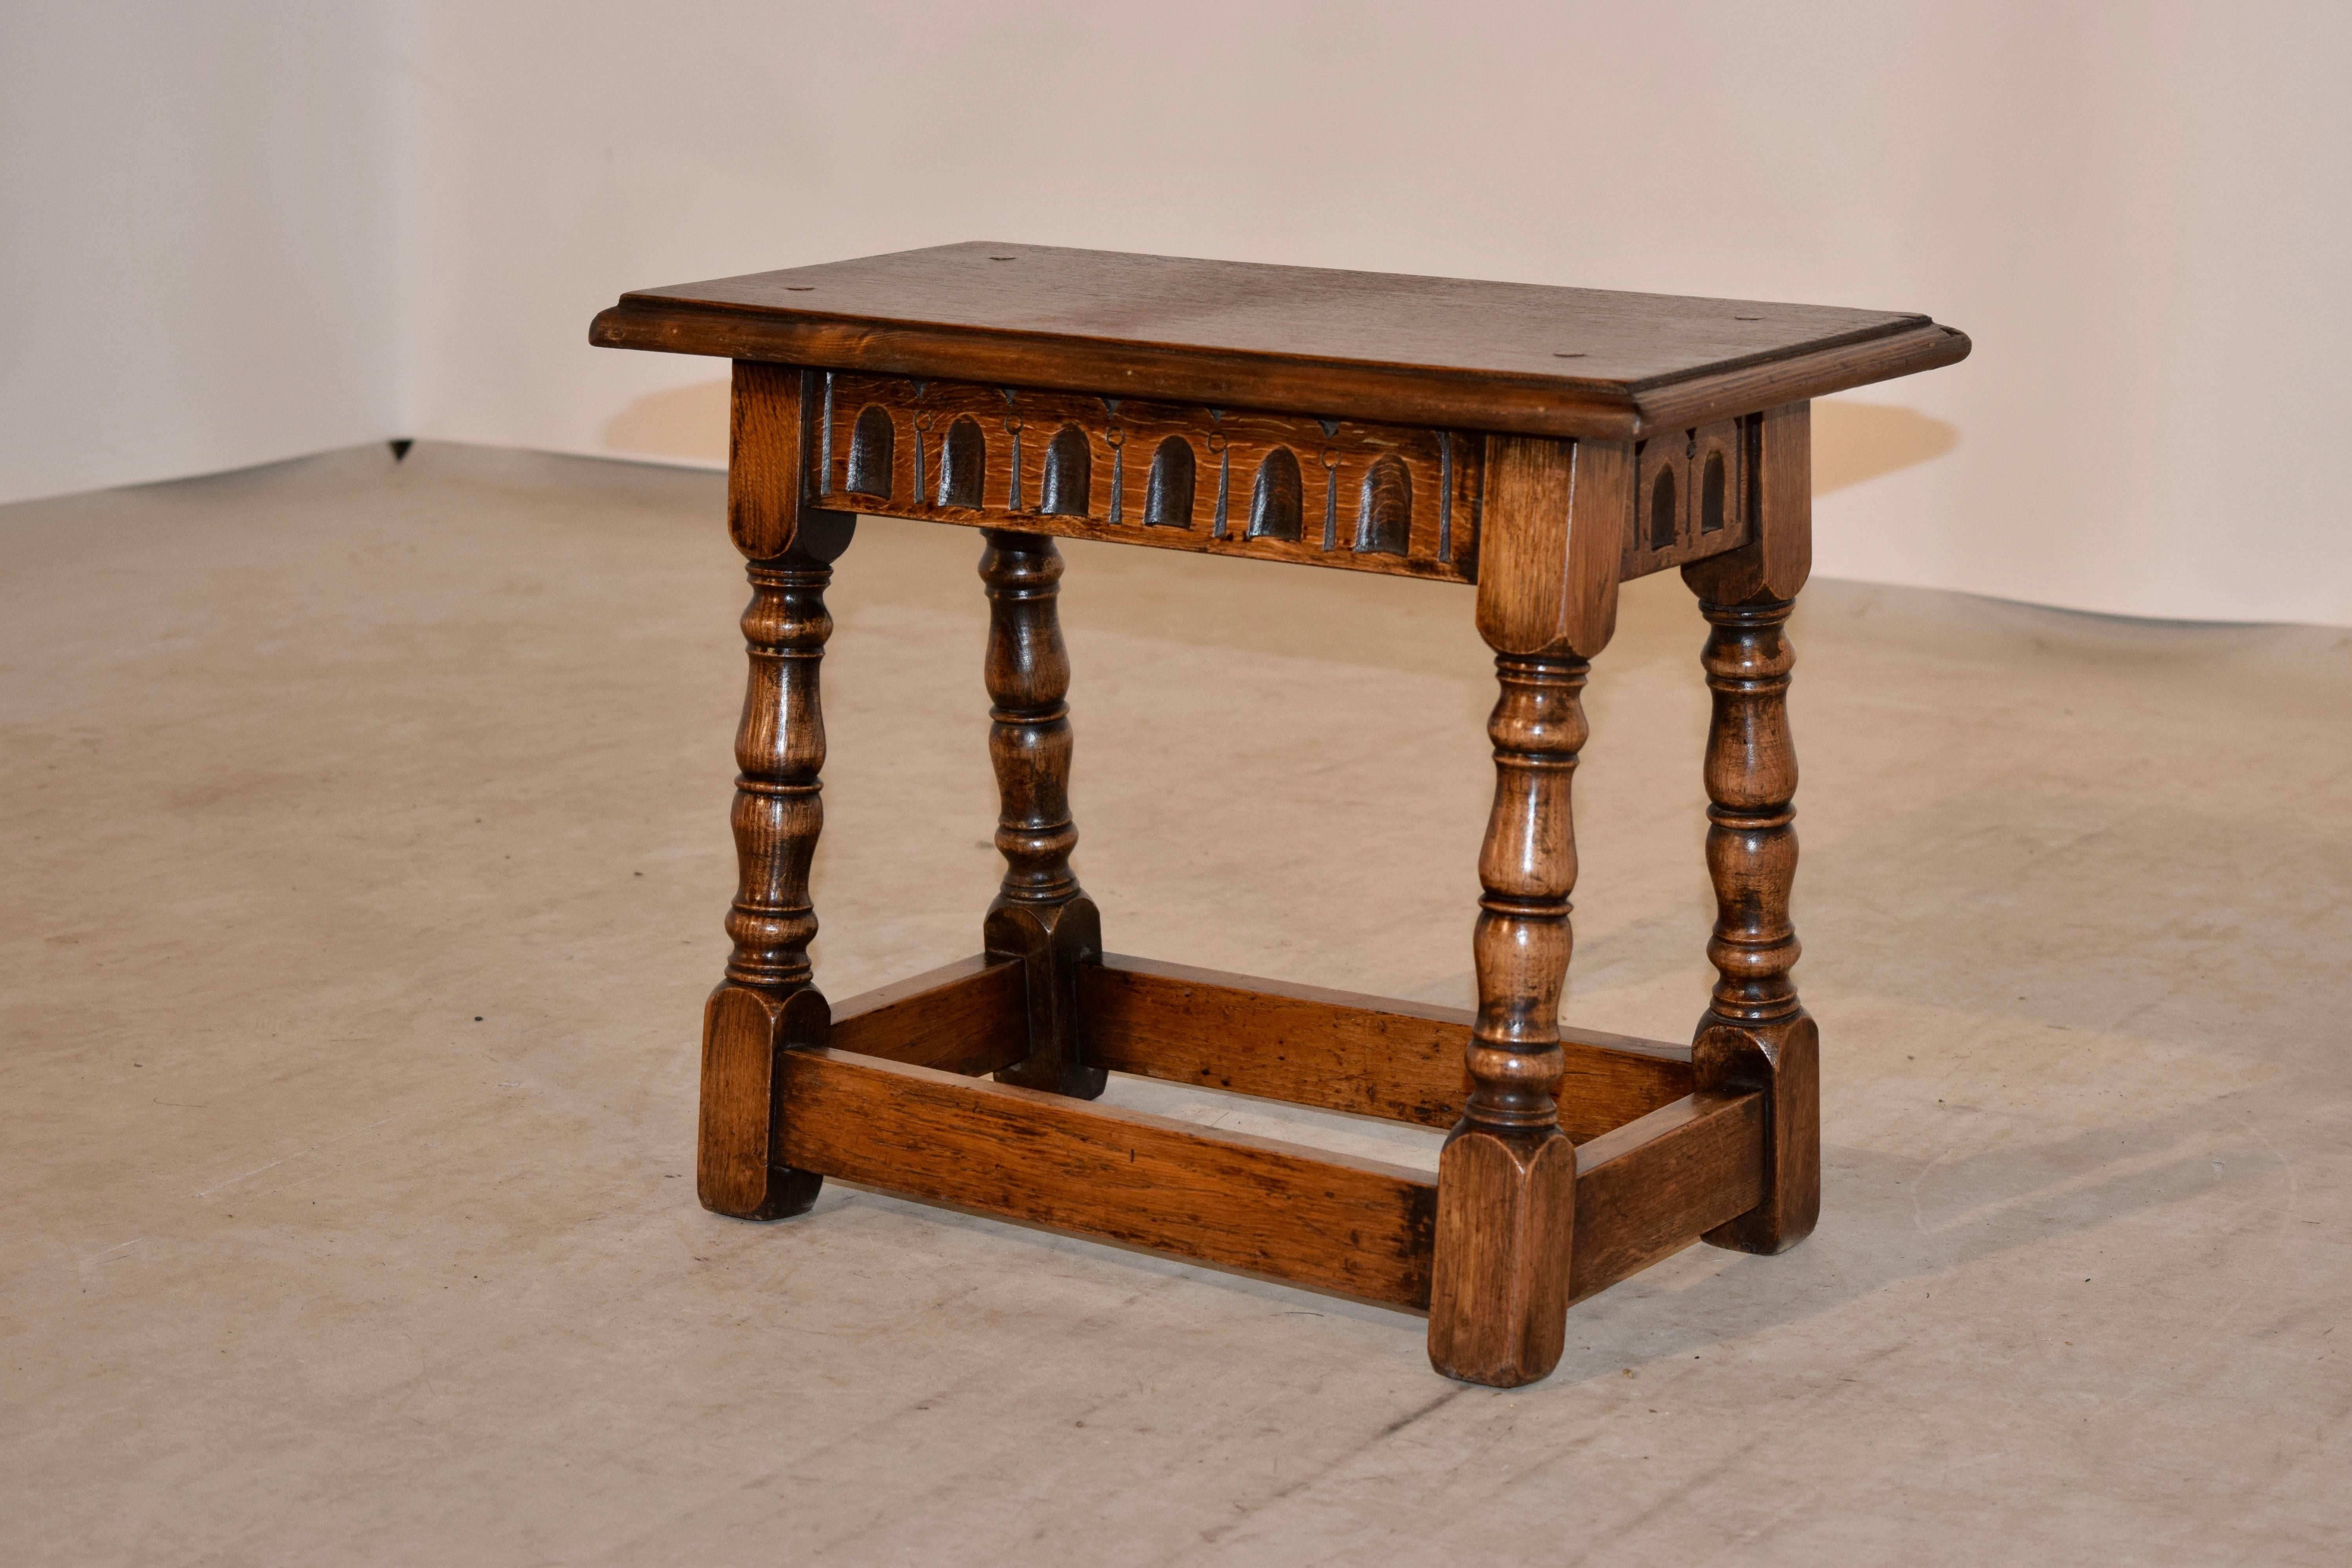 English oak joint stool with a beveled top following down to a fluted apron and hand turned splayed legs joined by stretchers. Hand pegged construction.